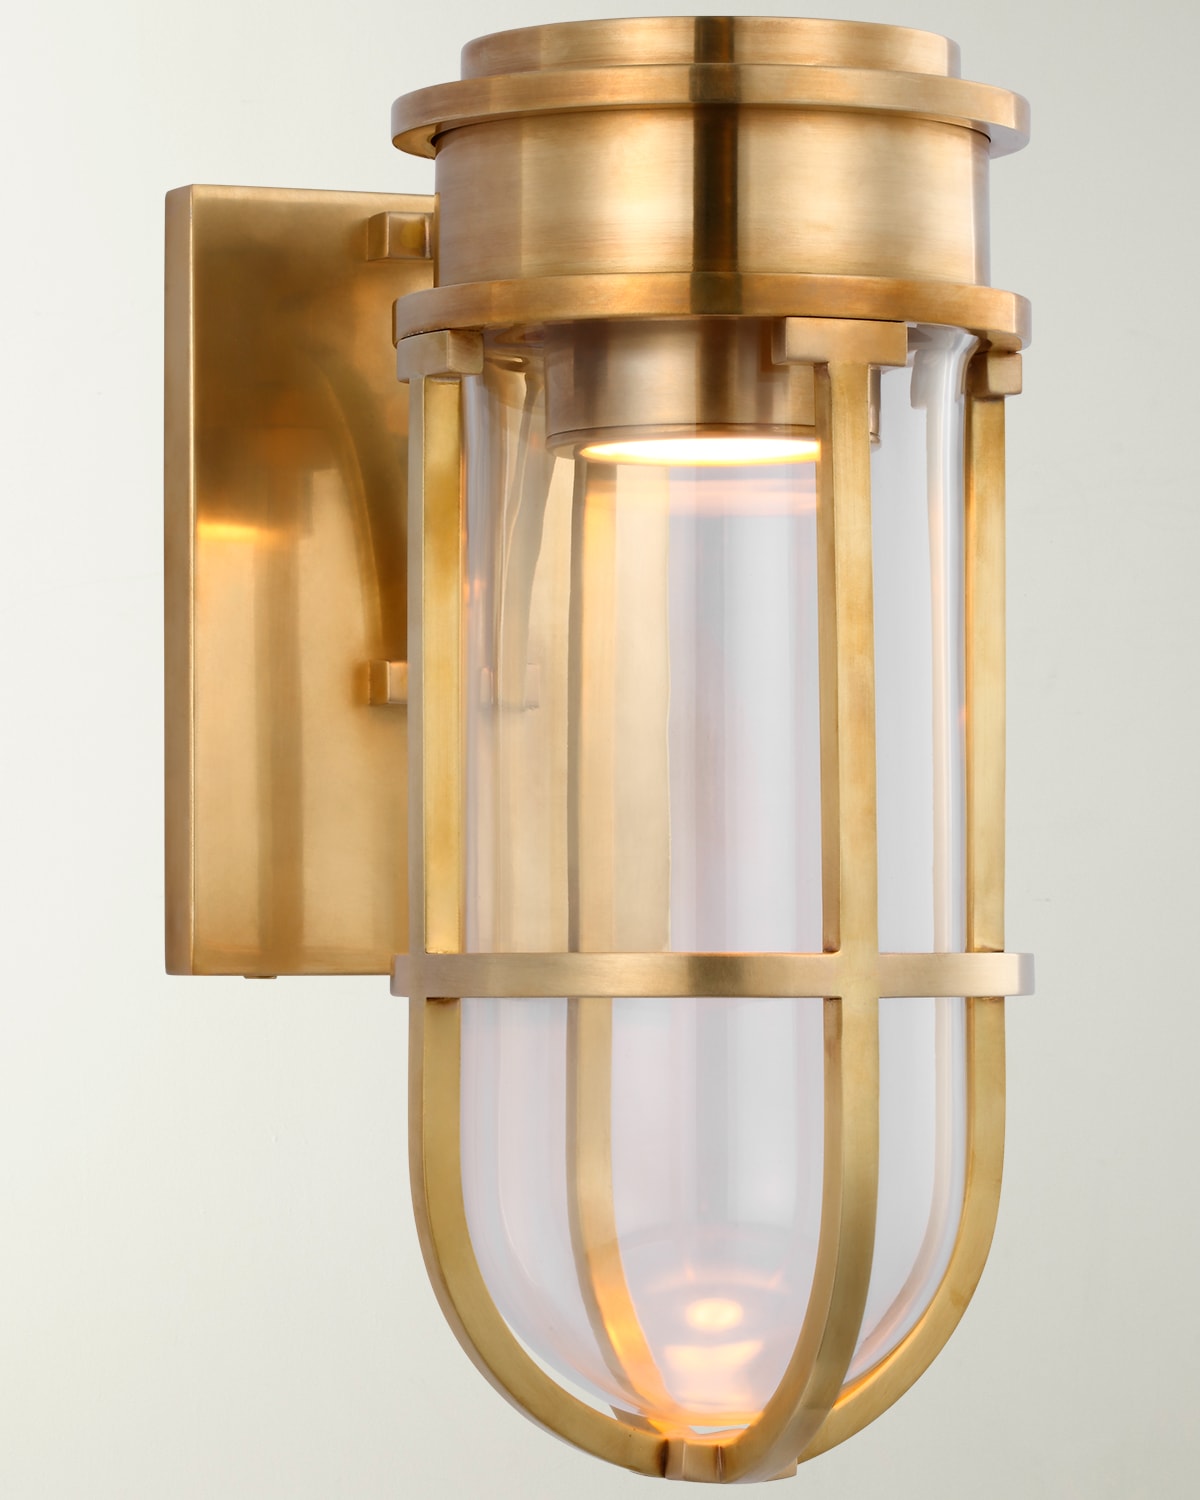 Chapman & Myers Gracie Tall Bracketed Sconce